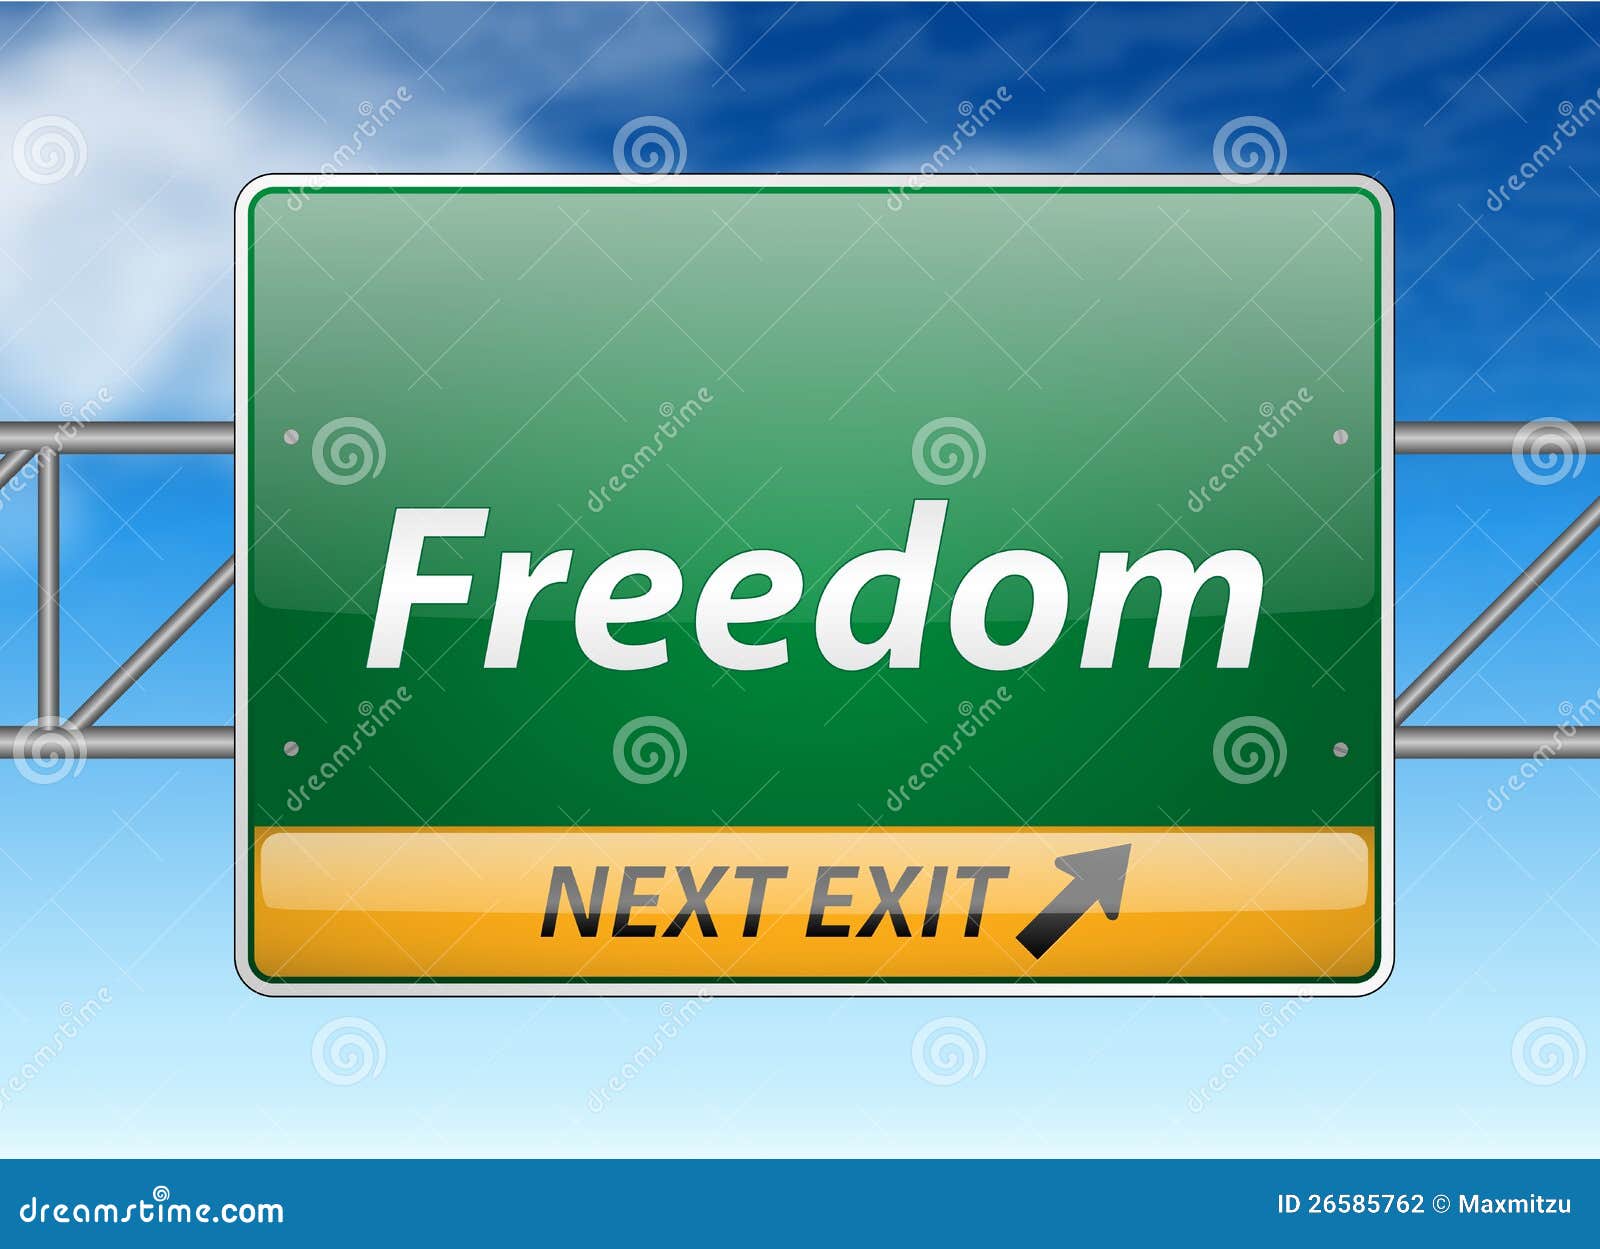 clip art highway exit sign - photo #33